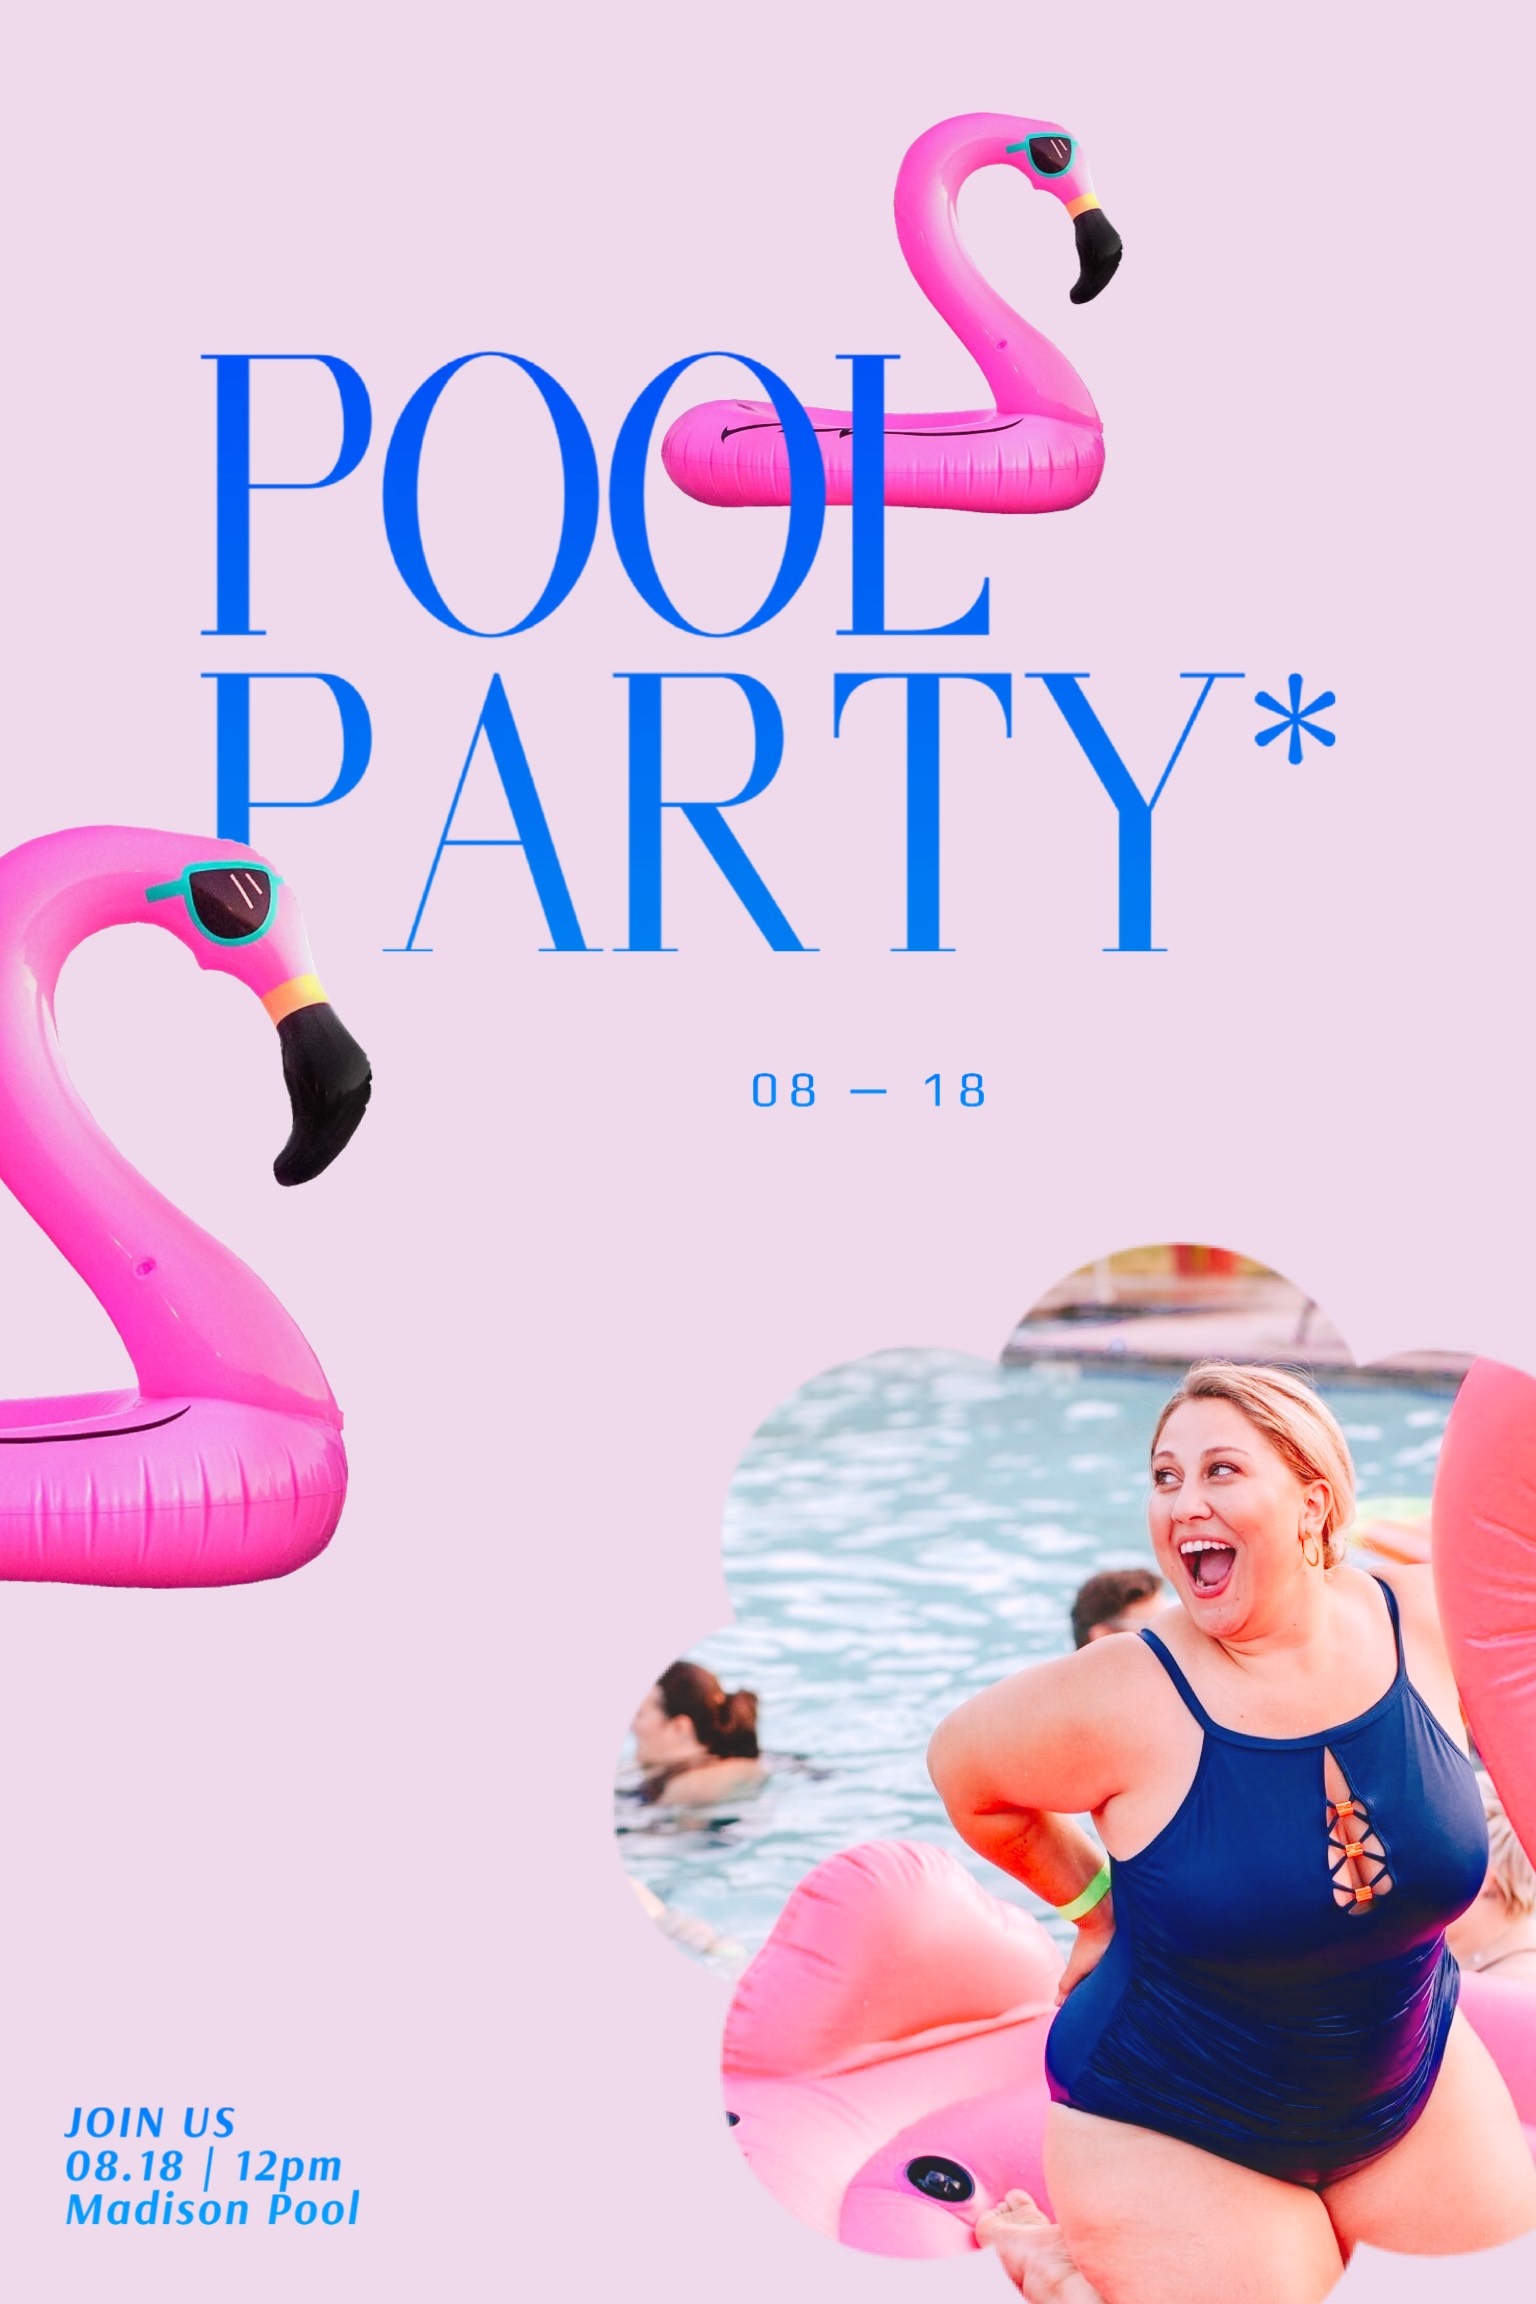 Woman at the pool with pink inflatable flamingo pool party invitation template